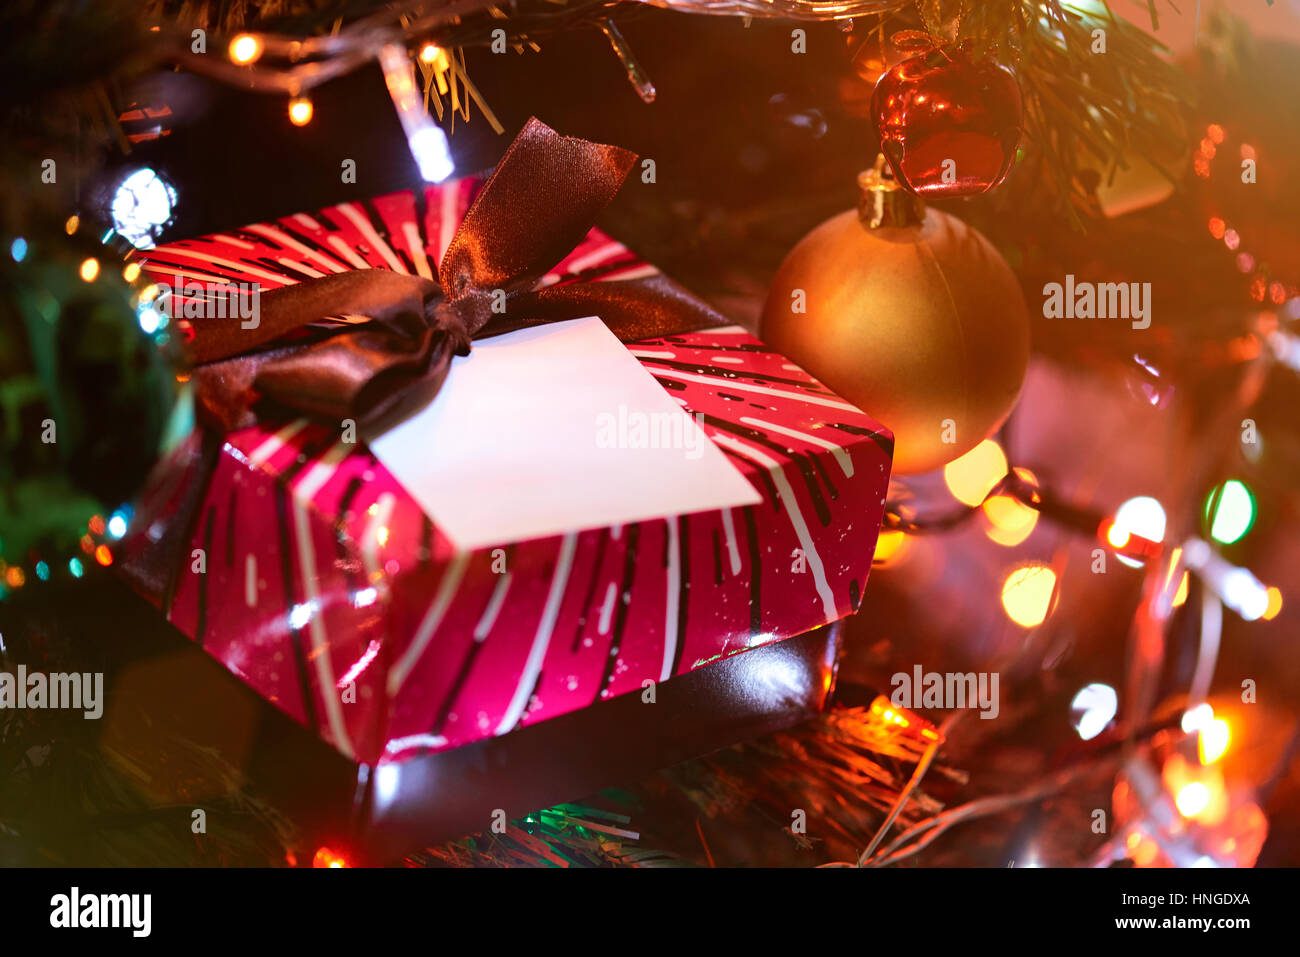 Decoration for new year celebration with christmas tree blurred lights Stock Photo